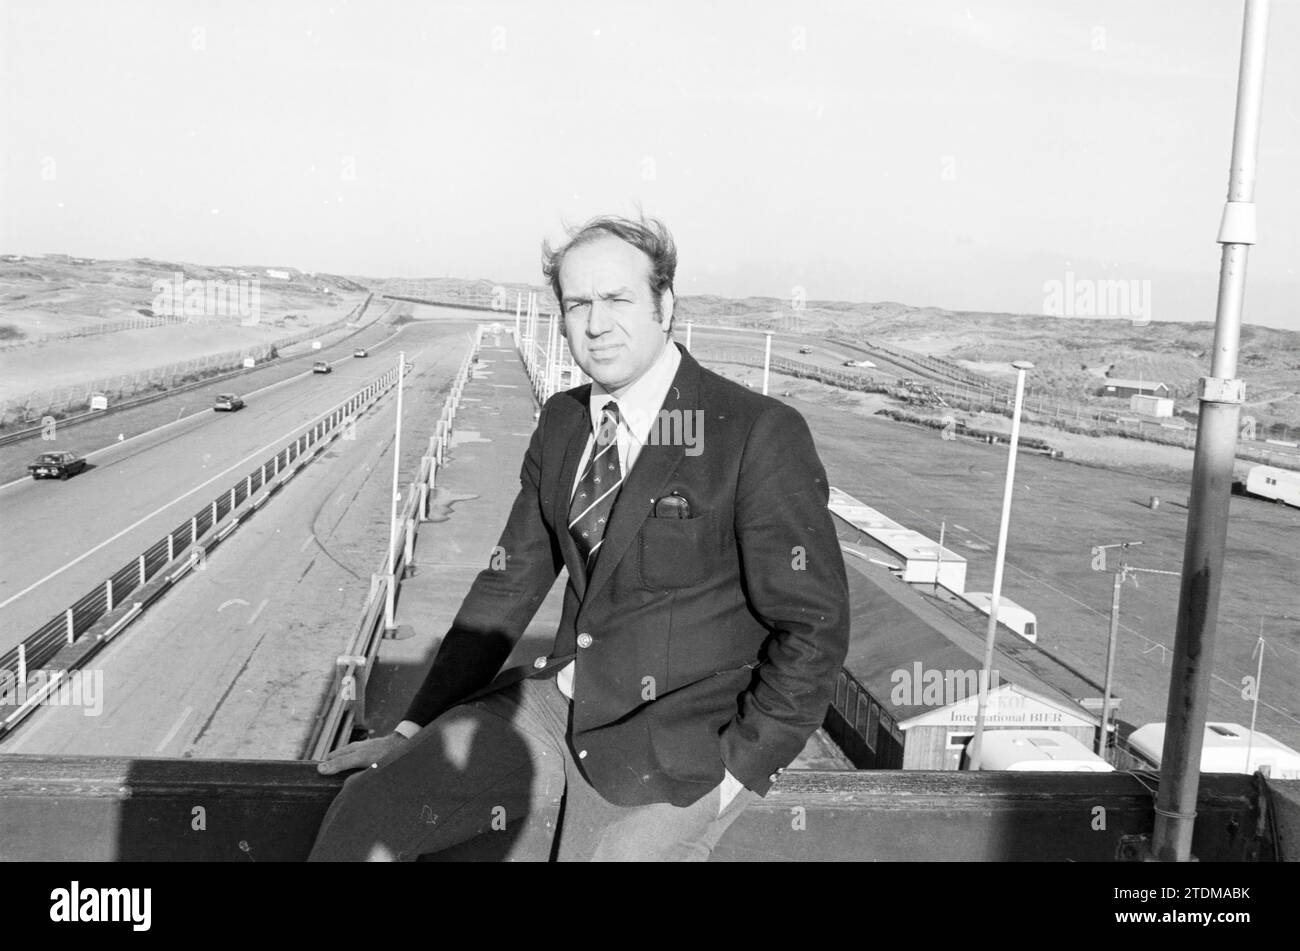 Jim Vermeulen, Circuit Zandvoort, Circuit Zandvoort, Persons, Zandvoort, 19-11-1981, Whizgle News from the Past, Tailored for the Future. Explore historical narratives, Dutch The Netherlands agency image with a modern perspective, bridging the gap between yesterday's events and tomorrow's insights. A timeless journey shaping the stories that shape our future Stock Photo